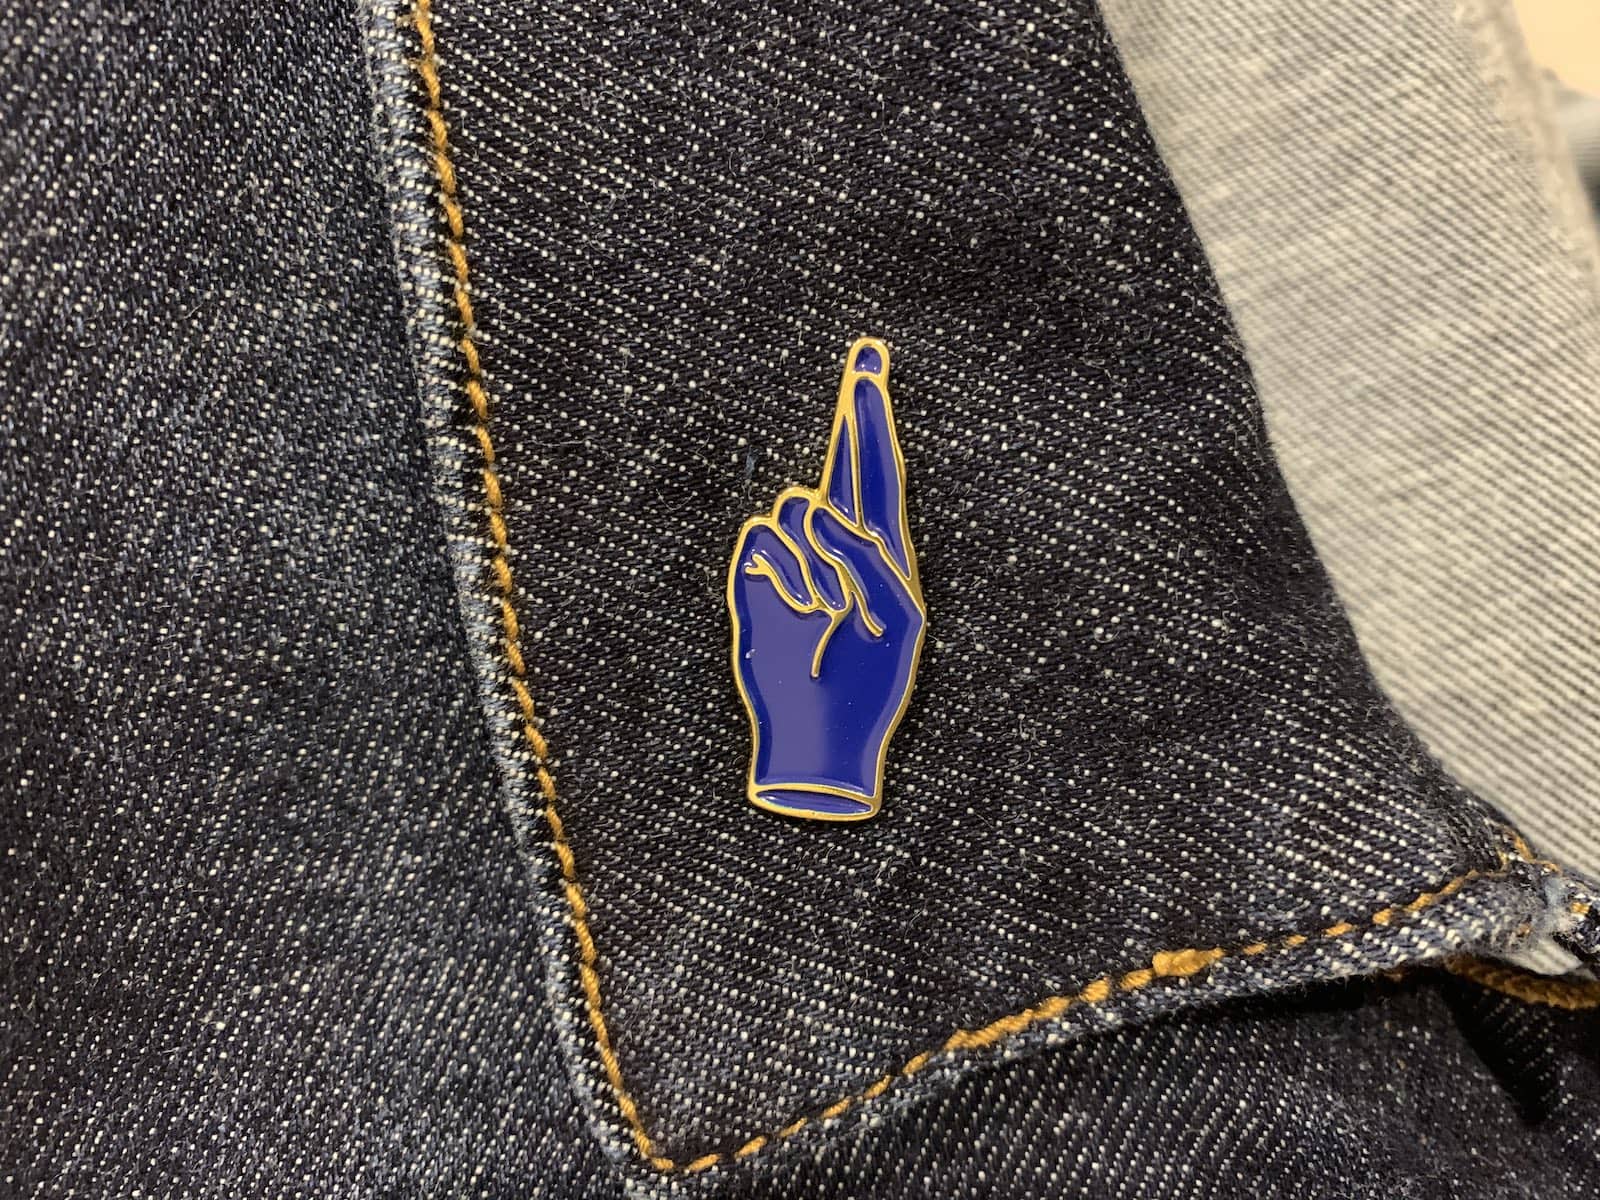 A blue enamel pin of the fingers crossed sign, on a dark denim collar